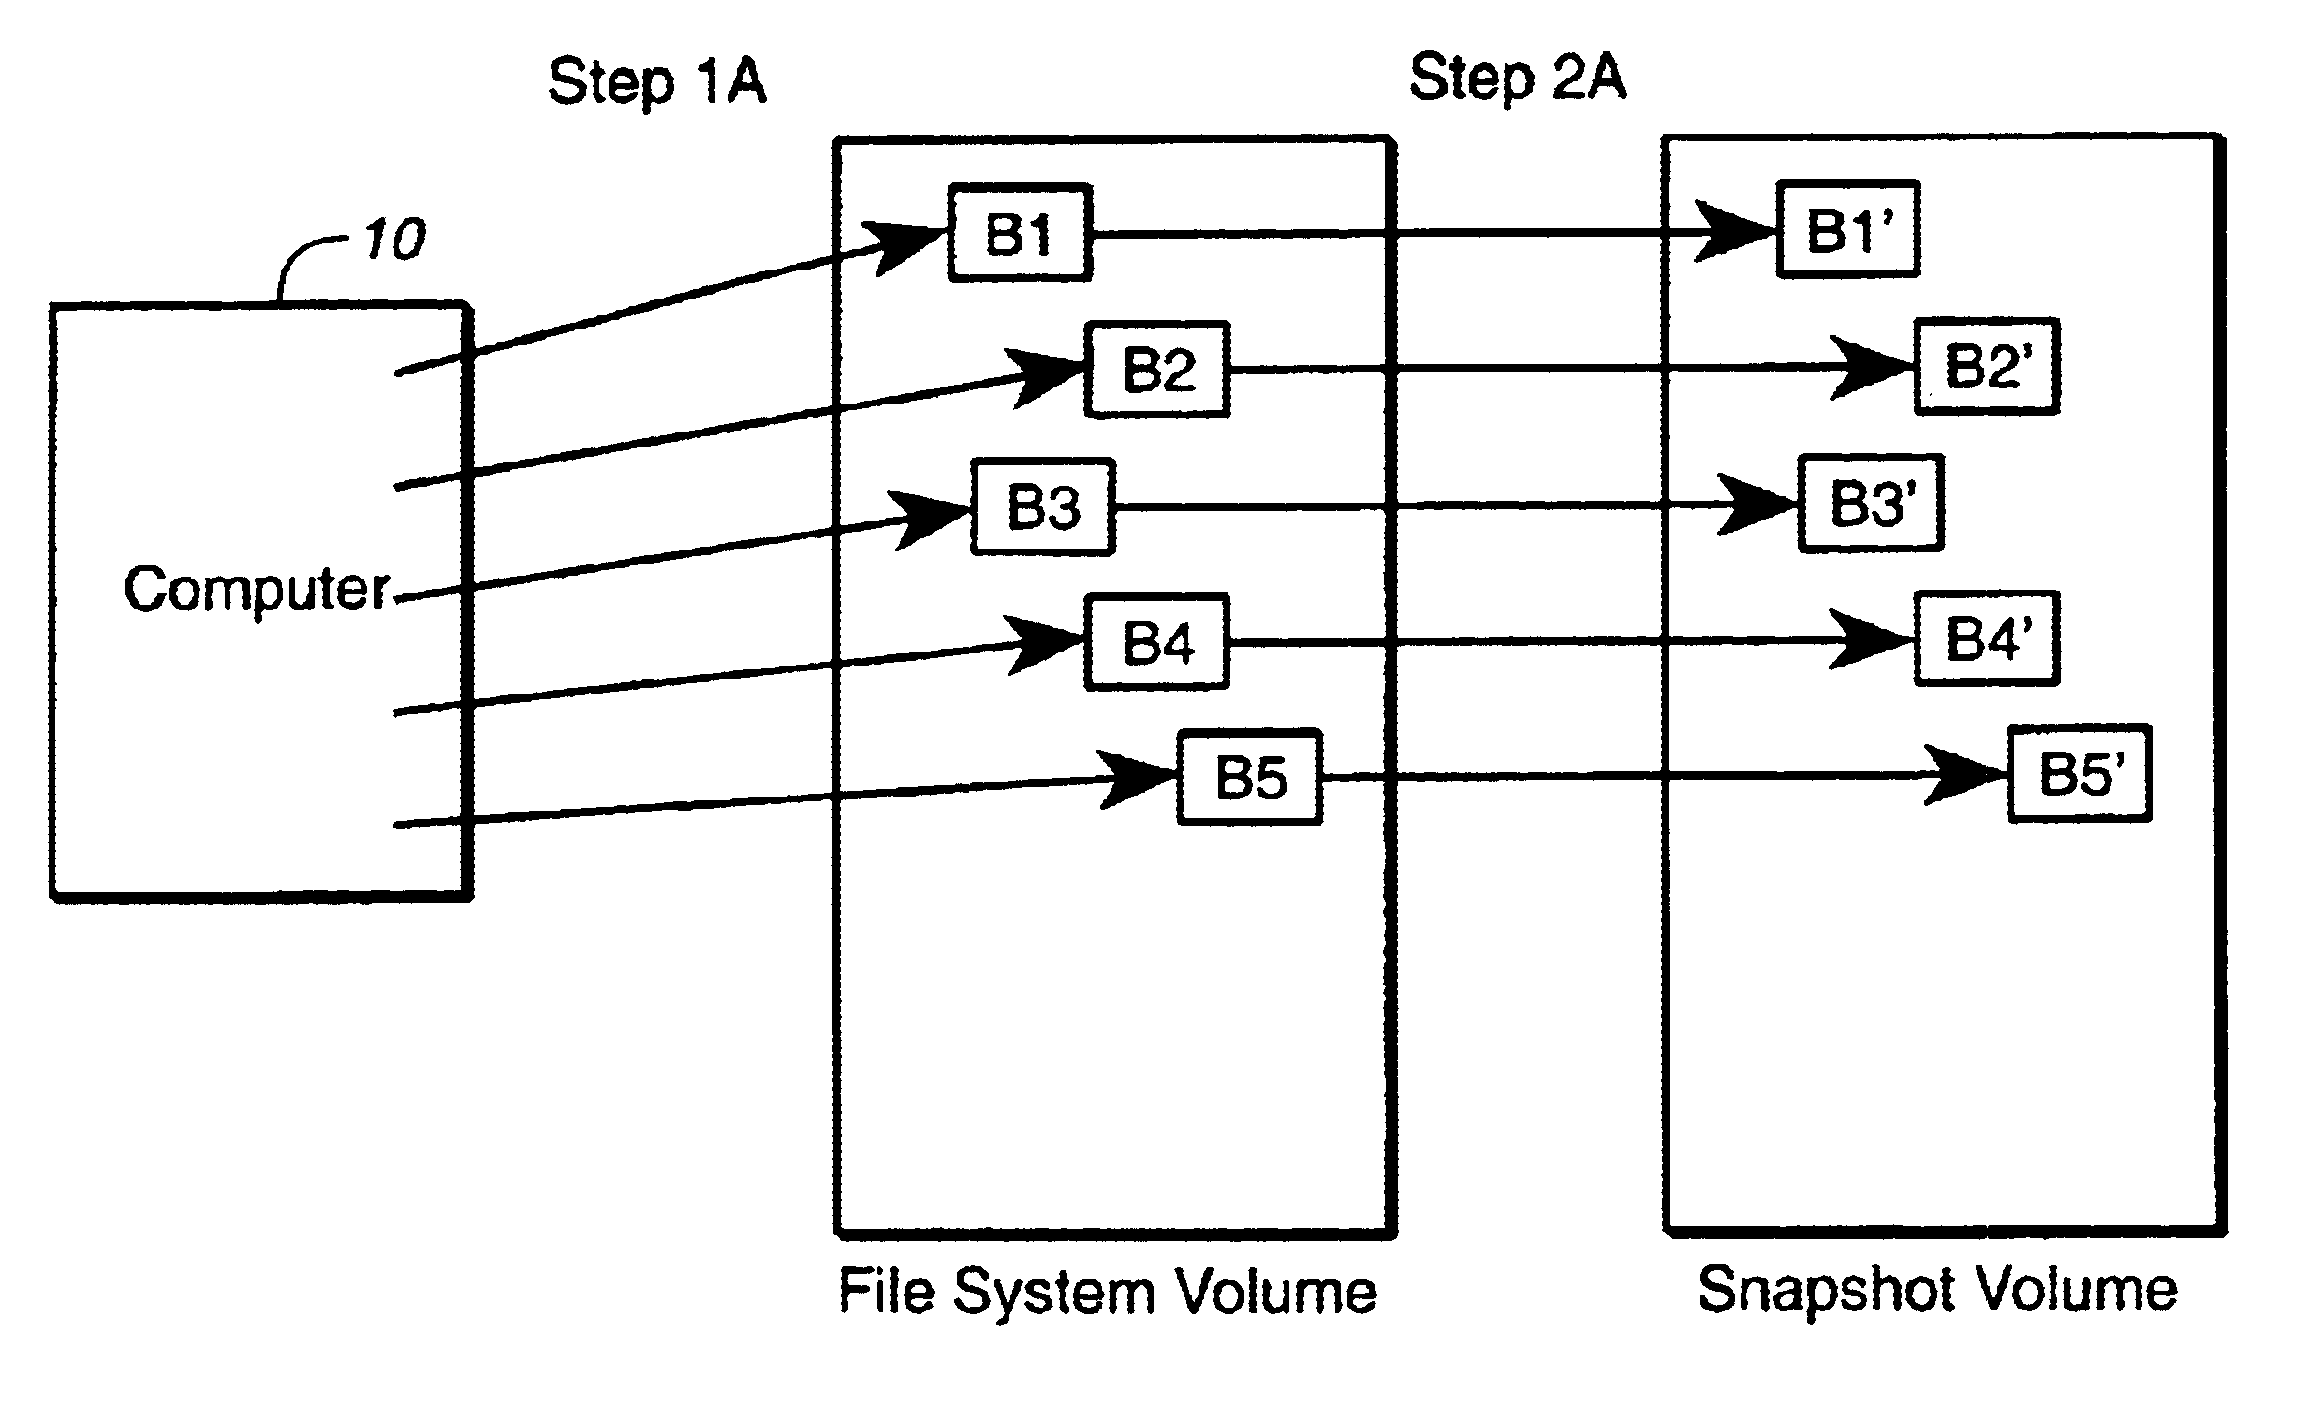 Method for the acceleration and simplification of file system logging techniques using storage device snapshots